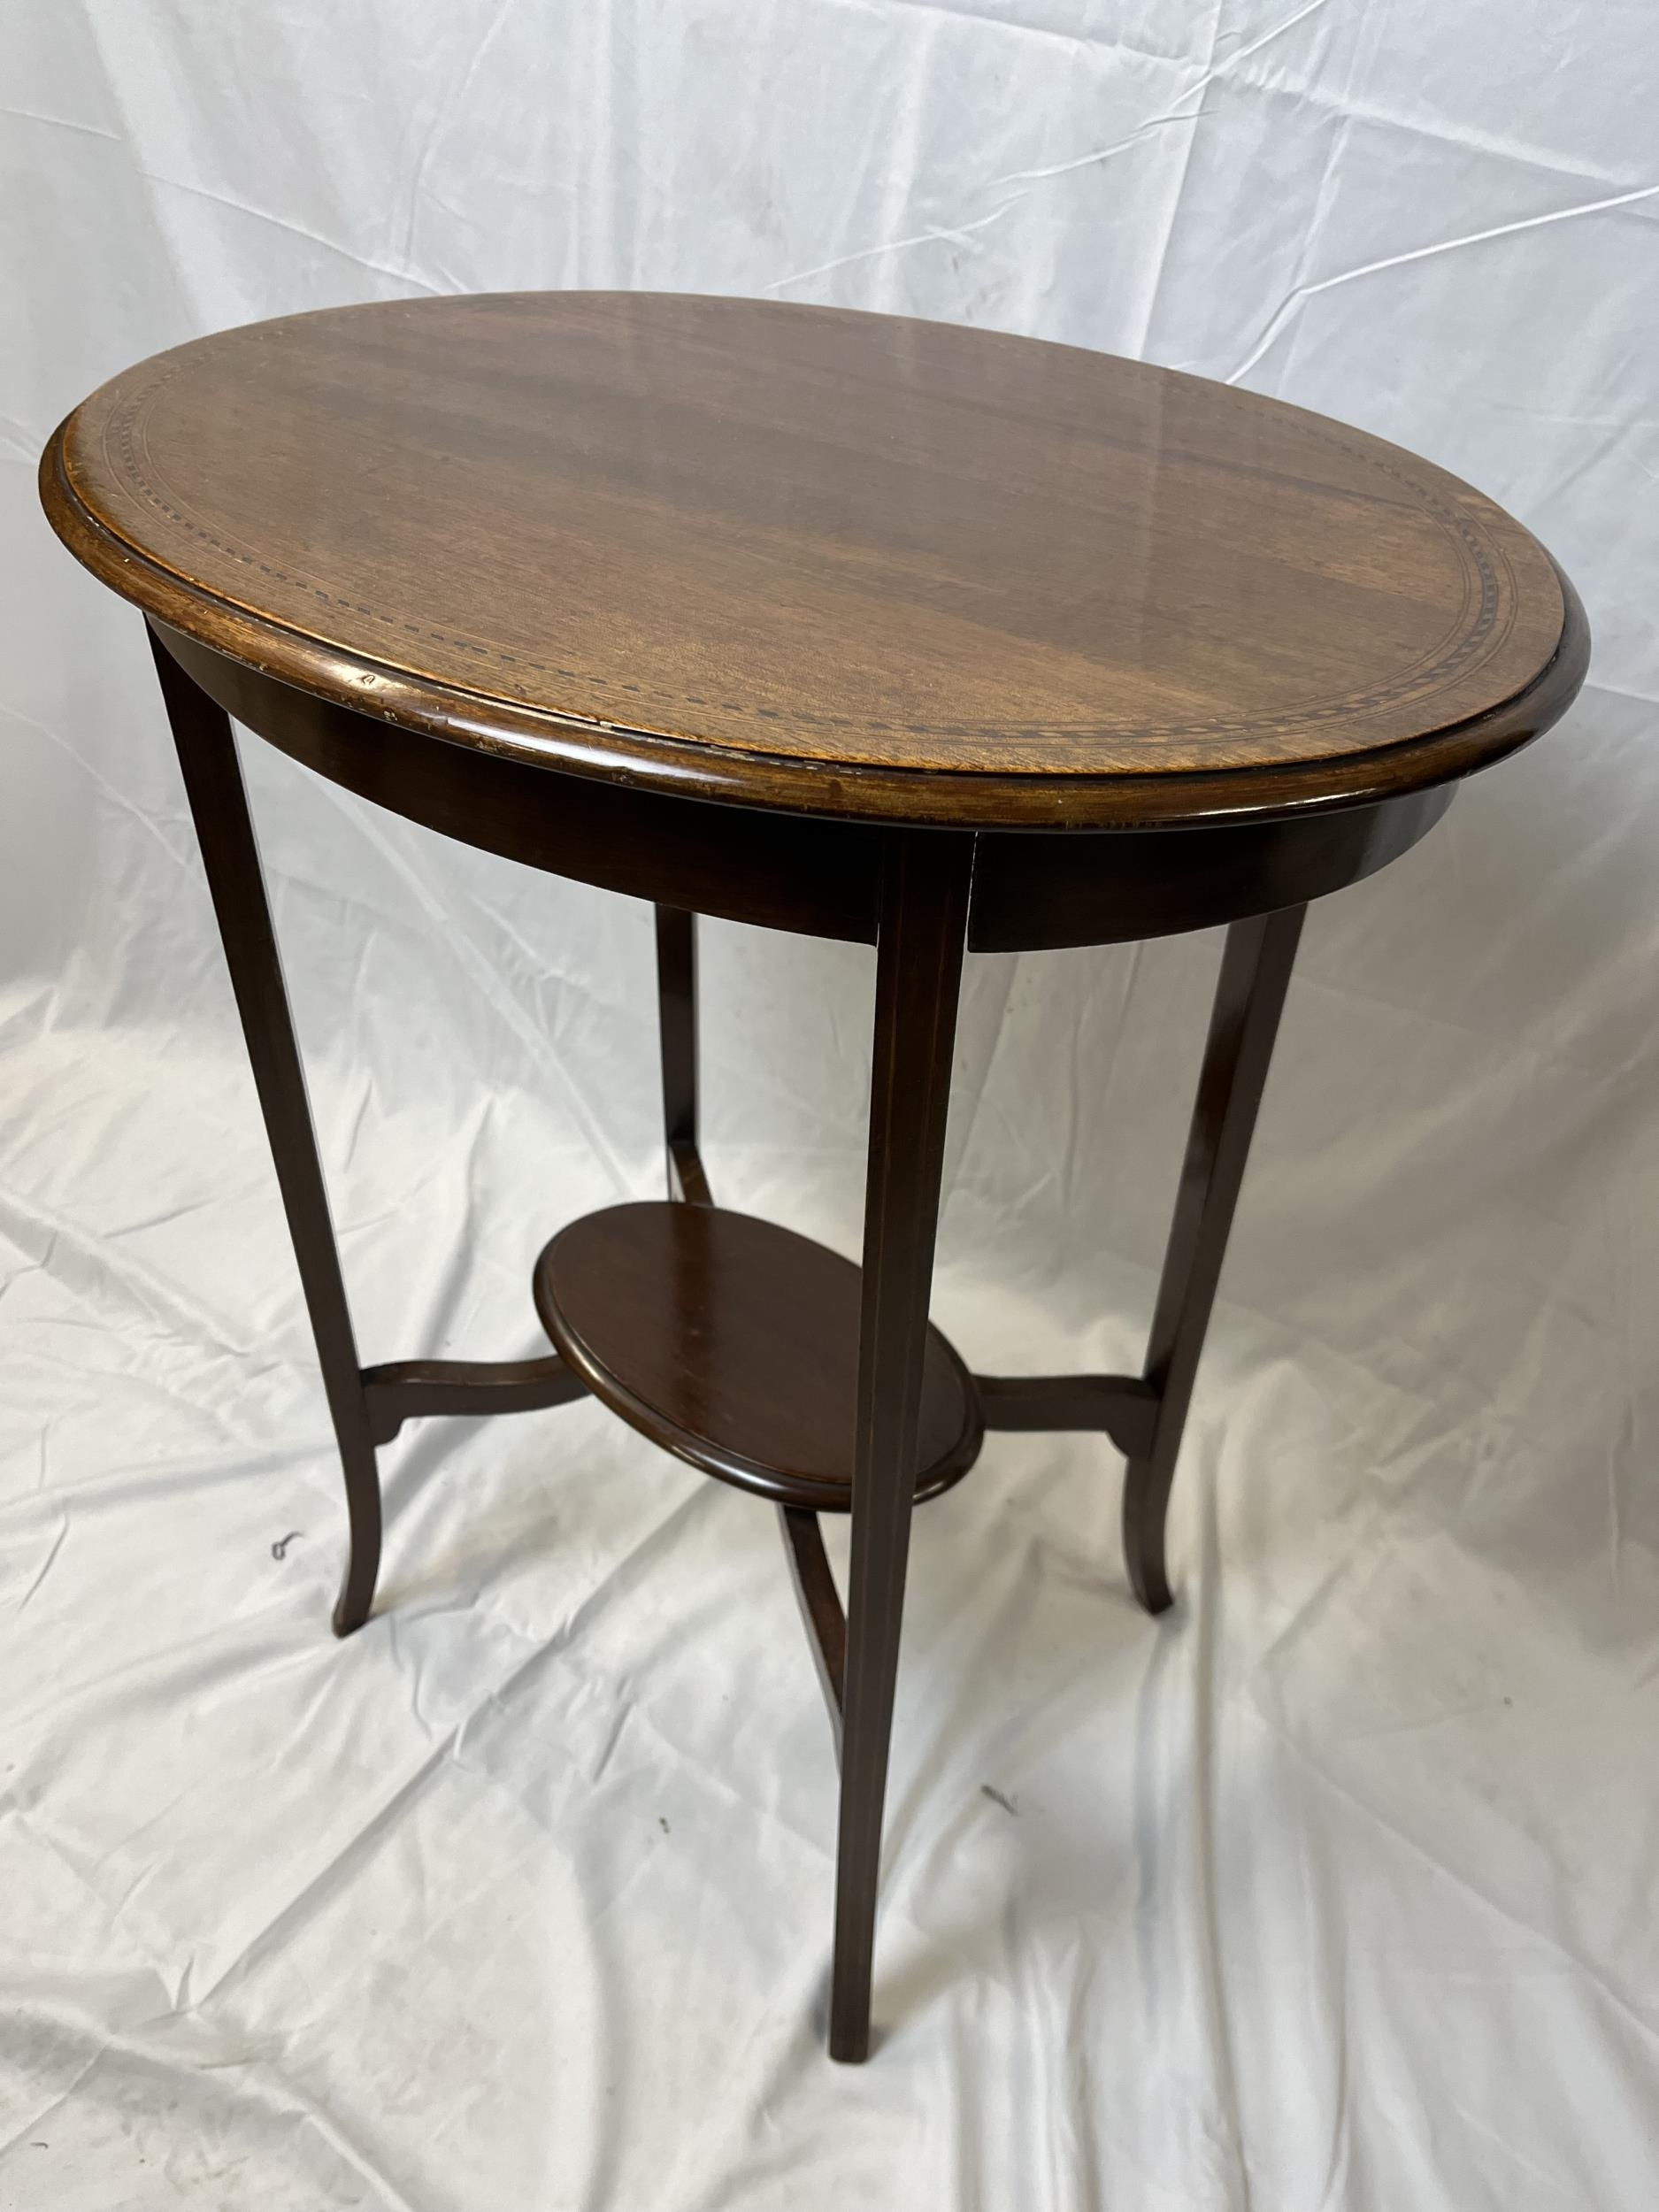 Lamp or occasional table, Edwardian mahogany and satinwood inlaid. H.71 W.62 D.45cm. - Image 3 of 4